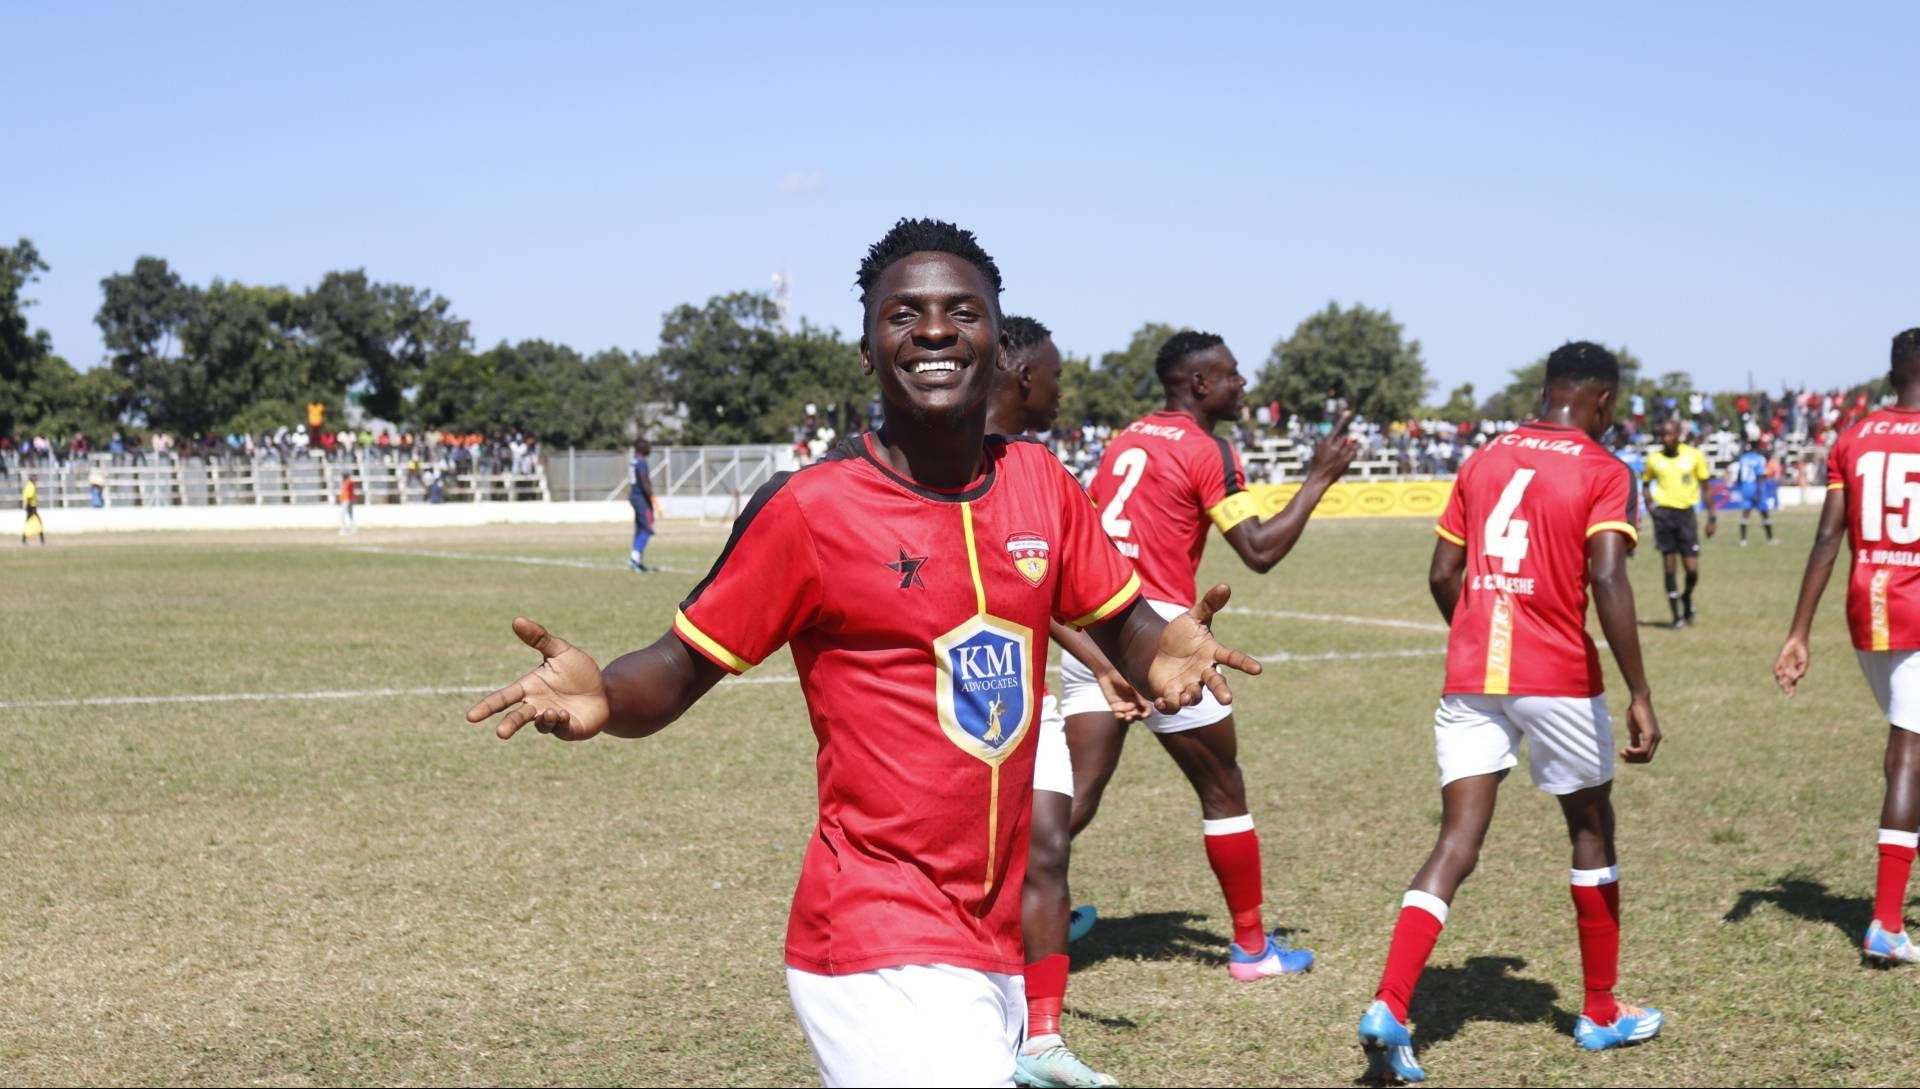 Andrew Phiri's hat-trick leads FC Muza to a dominant win over Nkwazi in MTN Super League